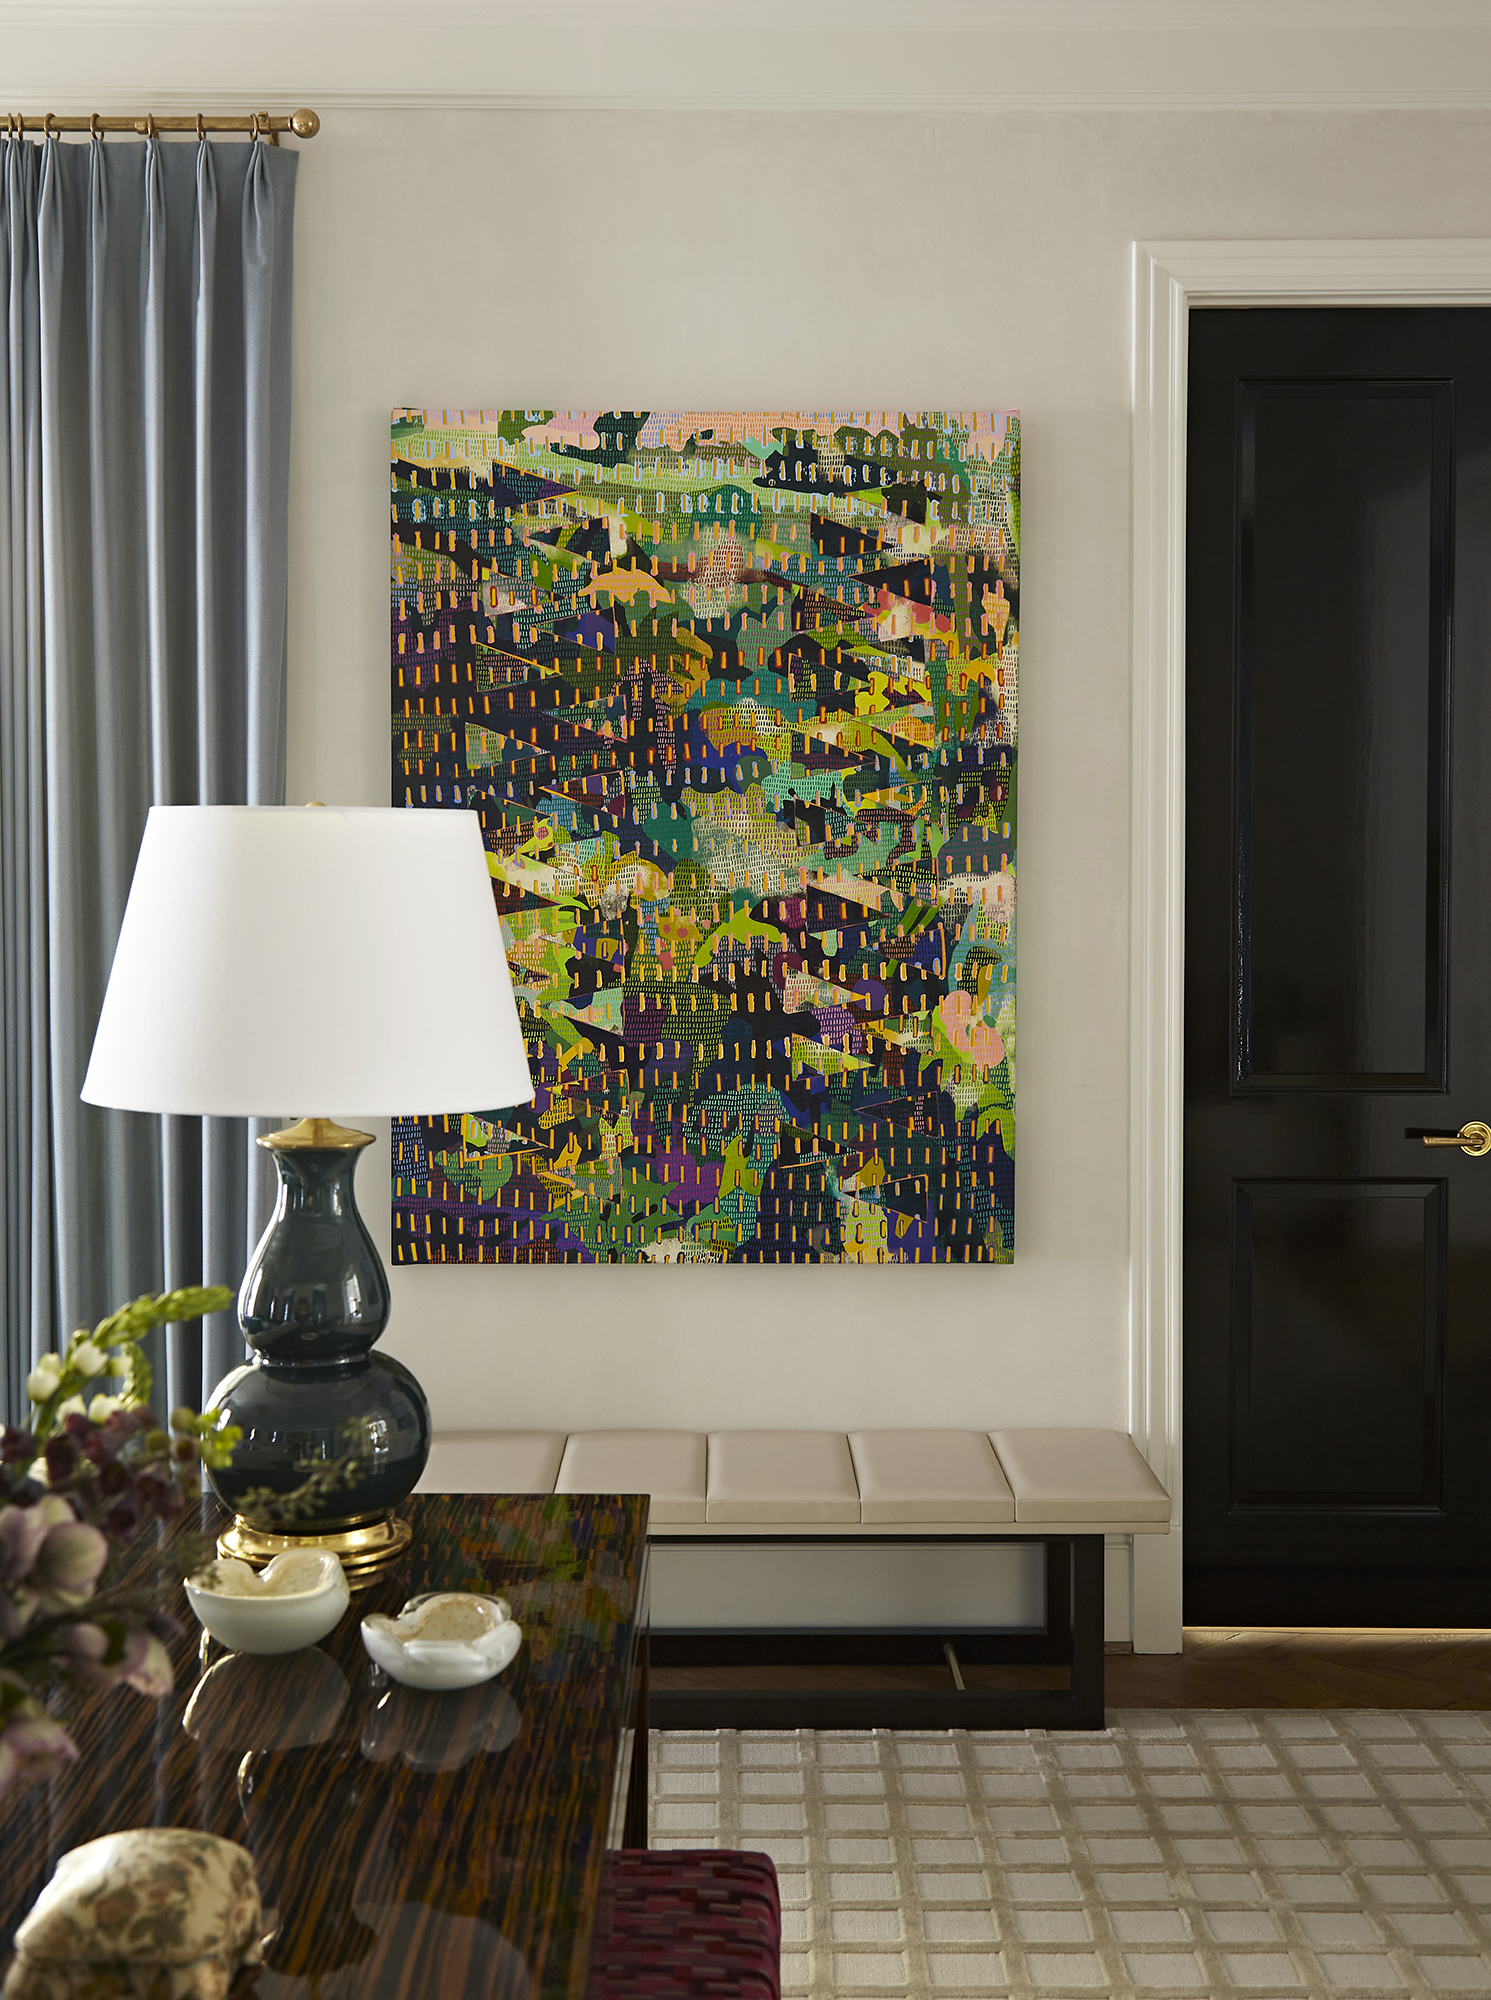 Chandos Expression Formal Living Room - Erin Curtis Stepped, 2021 Acrylic on cut and layered canvas